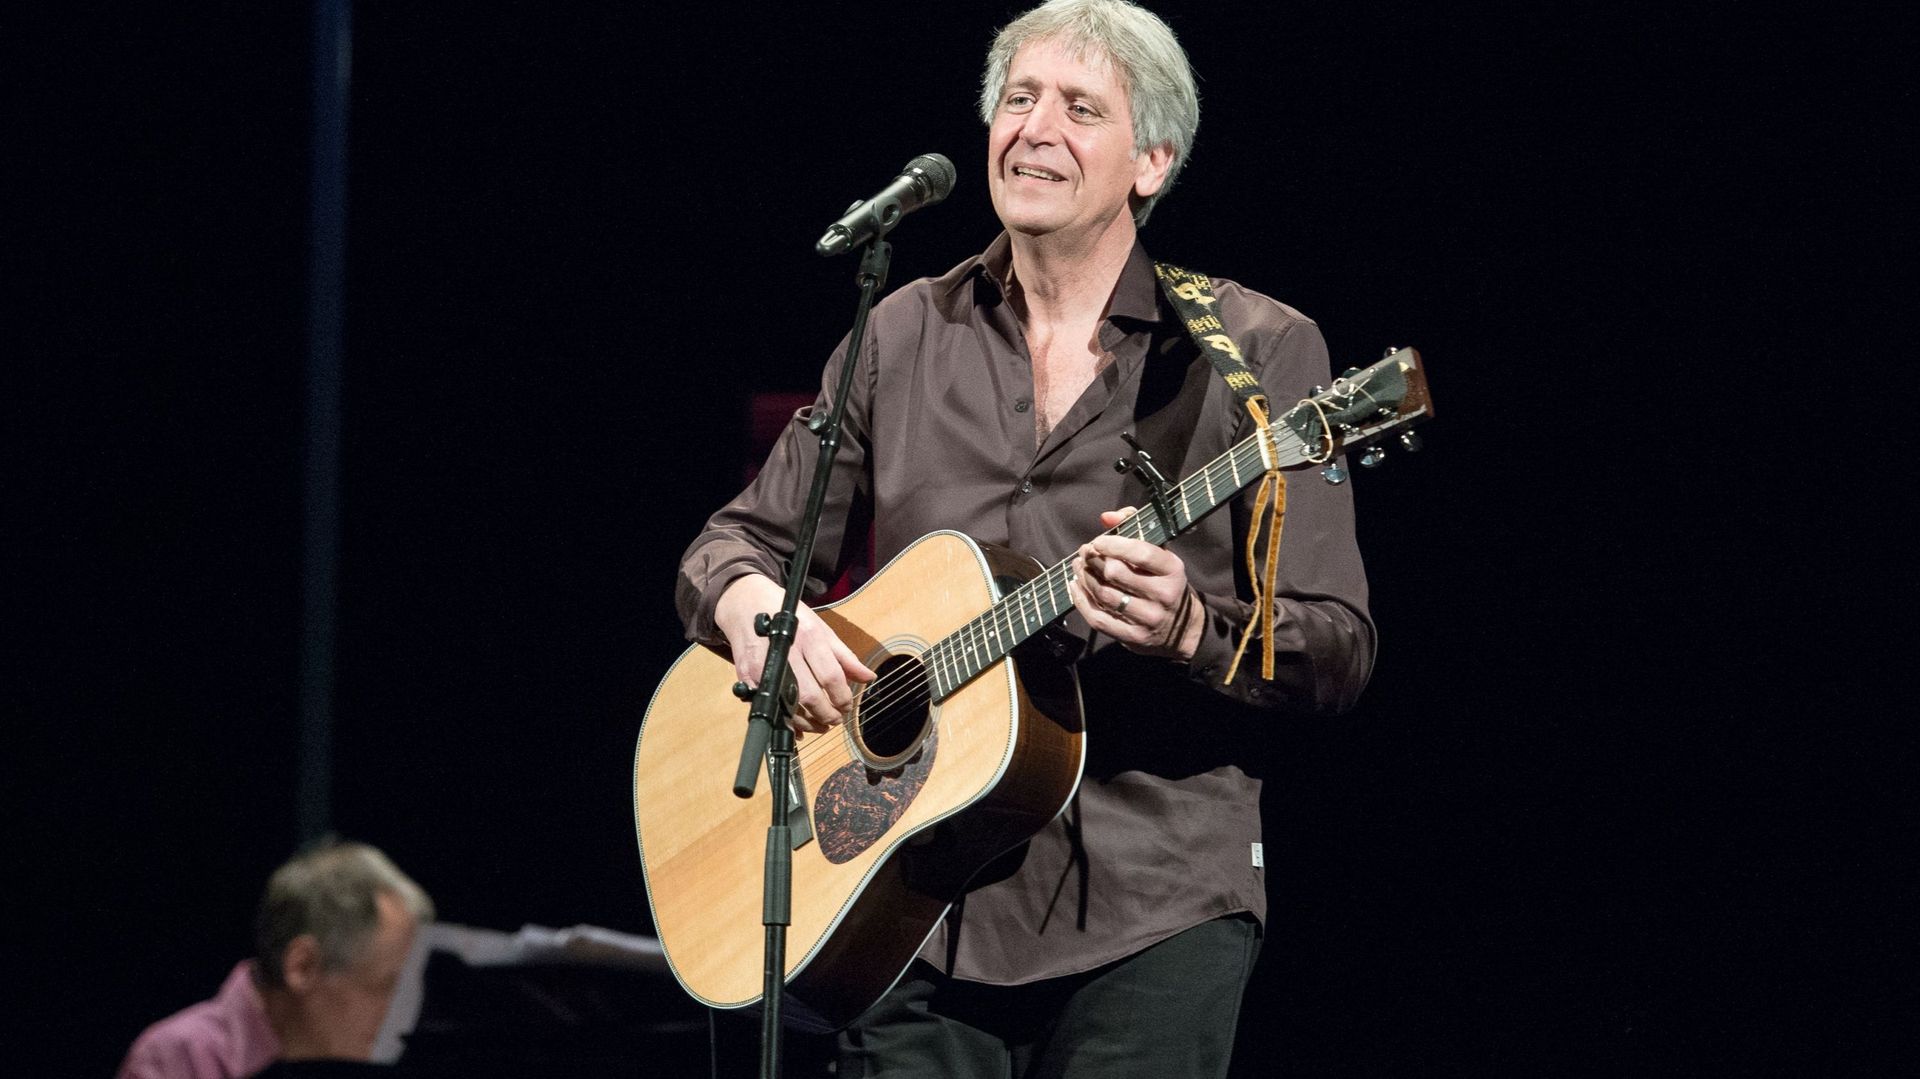 Yves Duteil In Concert At The Trianon In Paris